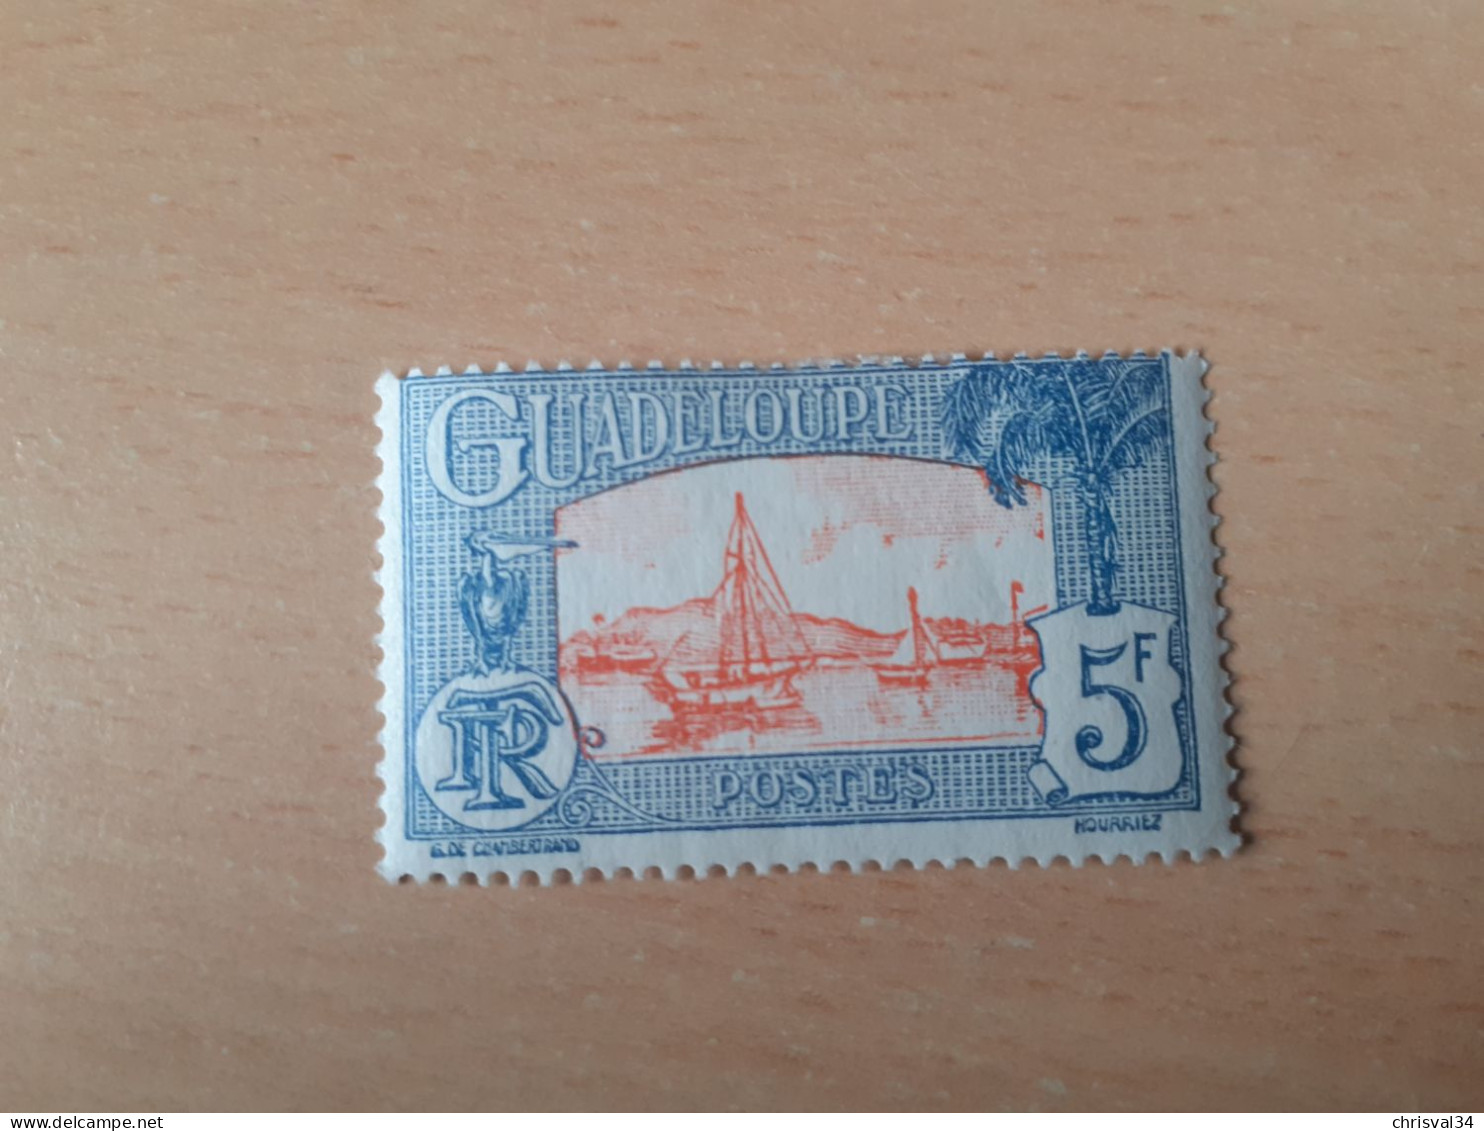 TIMBRE   GUADELOUPE       N  120    COTE  1,25   EUROS  NEUF  TRACE  CHARNIERE - Ongebruikt